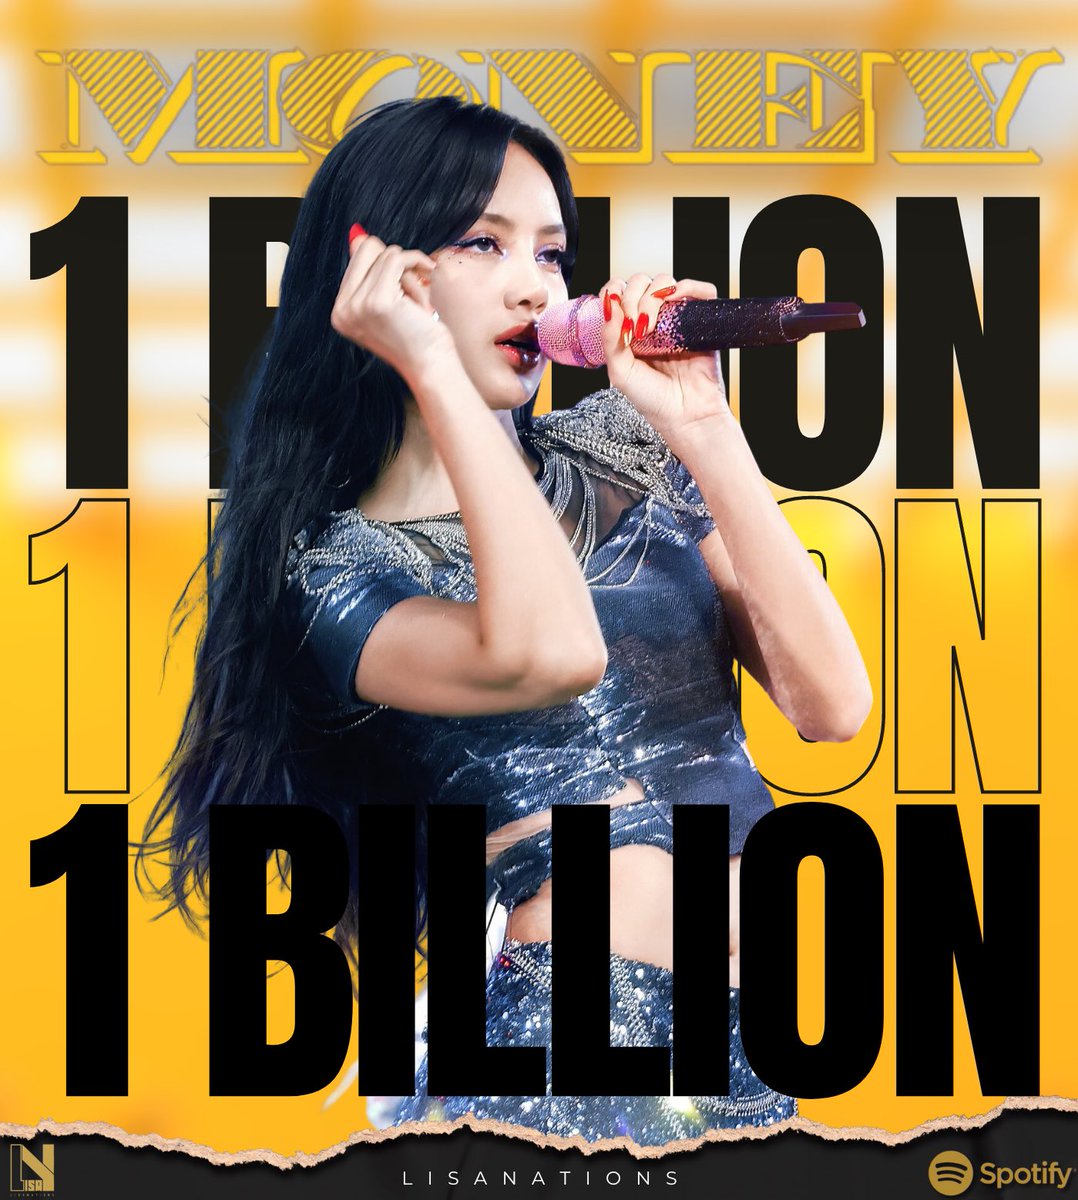 #MONEY by #LISA has now surpassed 1 BILLION streams on Spotify making Lisa the first K-pop soloist act and first K-pop Female to do so in history!

Congratulations Lisa! 🍾

LALISA 1ST KPOP SOLOIST
LISA 1ST KPOP FEMALE ACT
#MoneySpotifyBillionClub